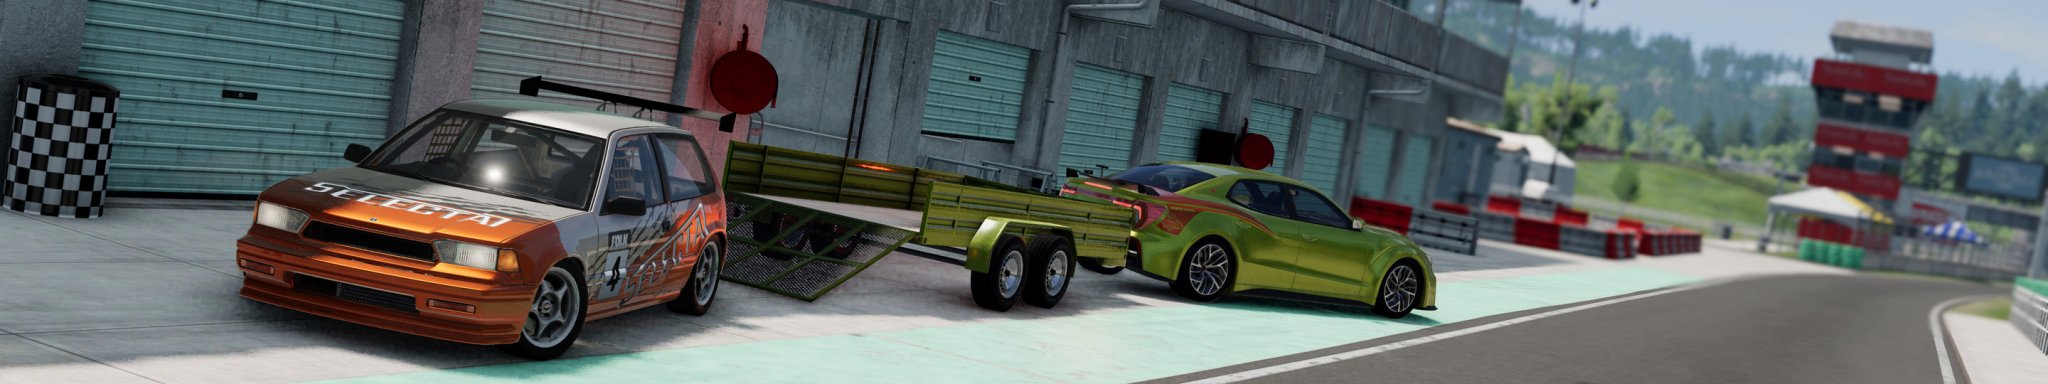 3 BeamNG TRACK CAR and TRAILER copy.jpg